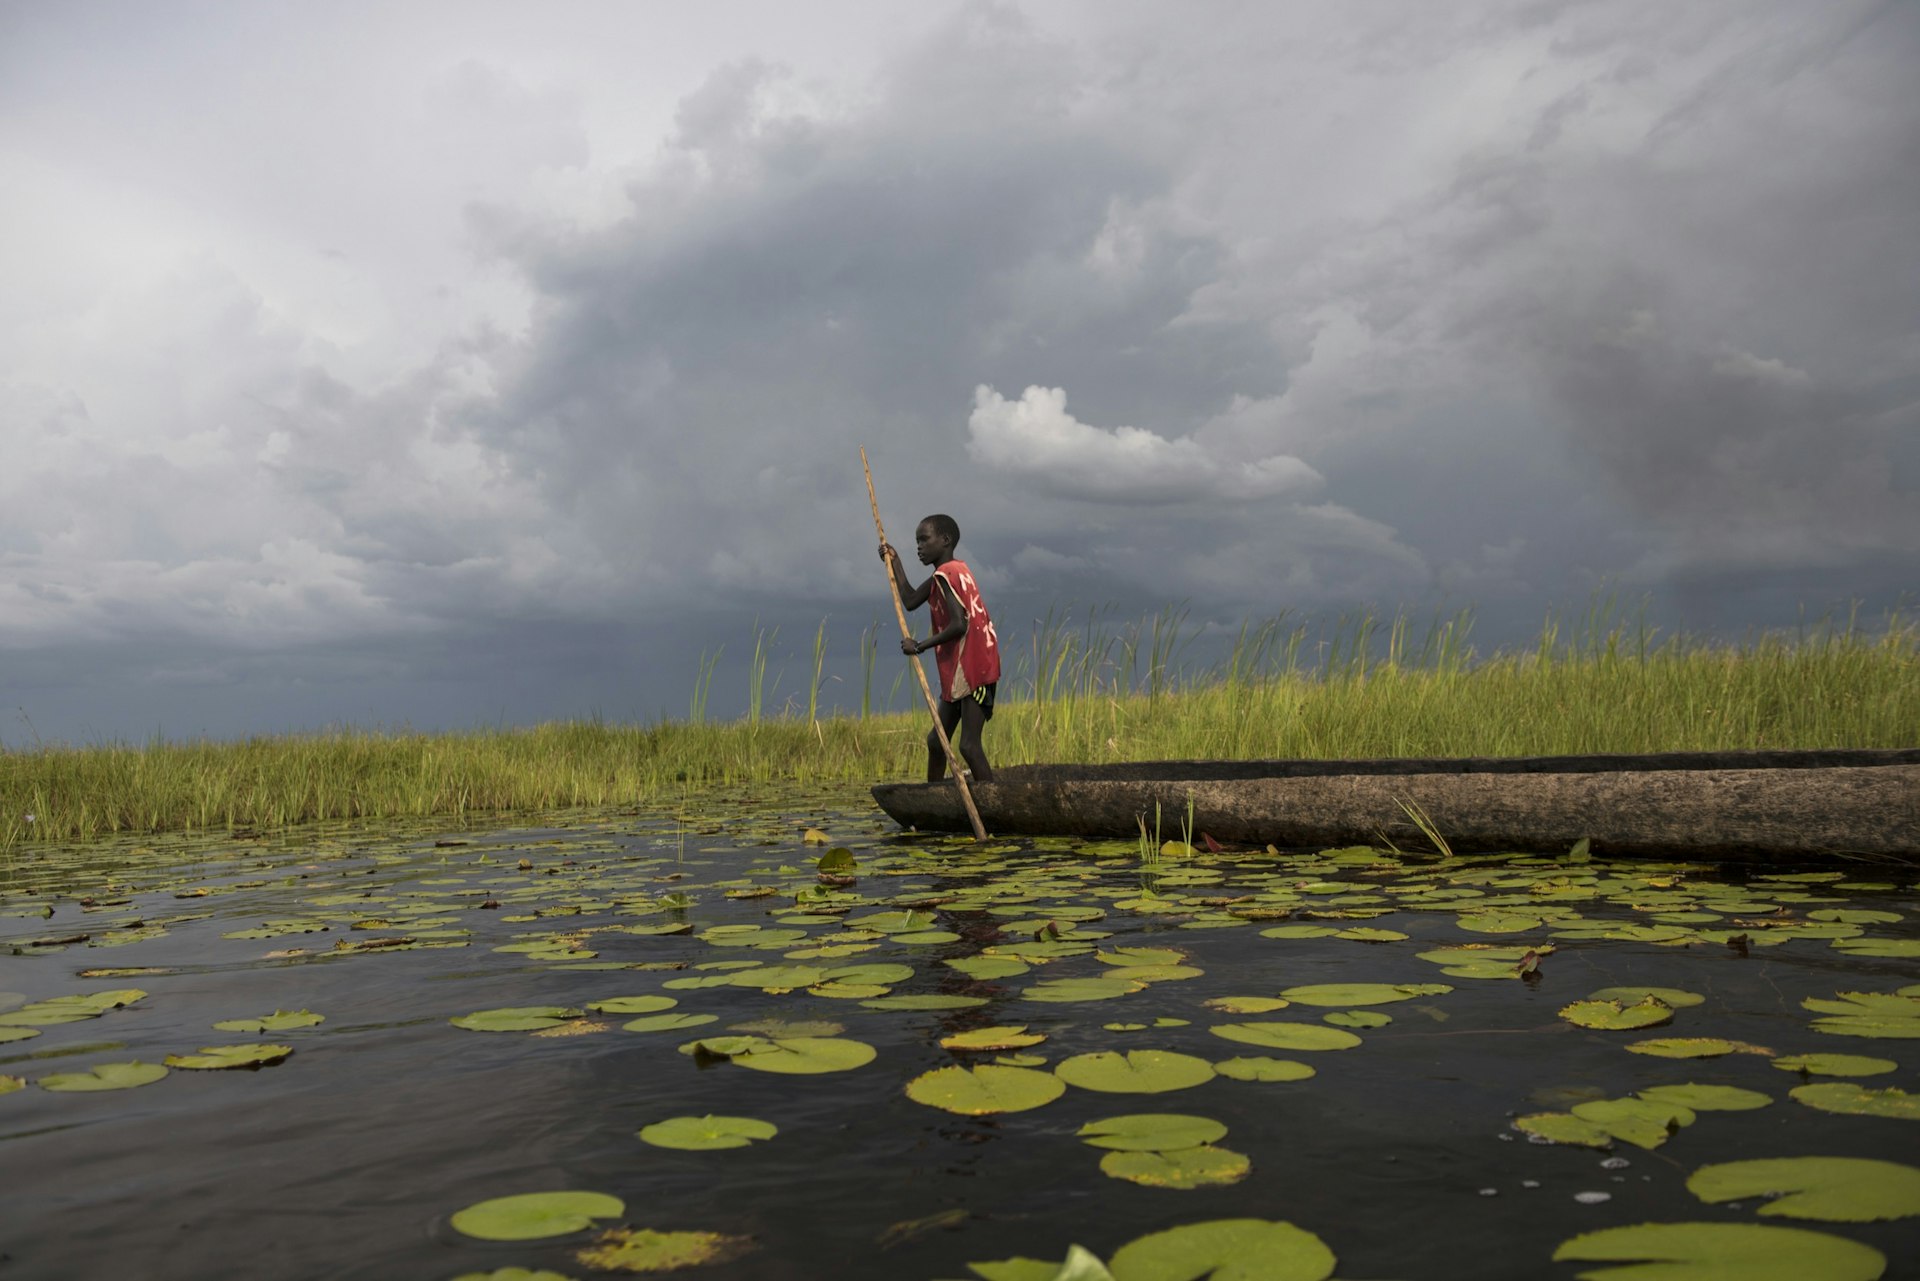 Nine-year-old Chuol fishes for tilapia in a vast swamp in South Sudan after fighters swept into his village, September 2015. 